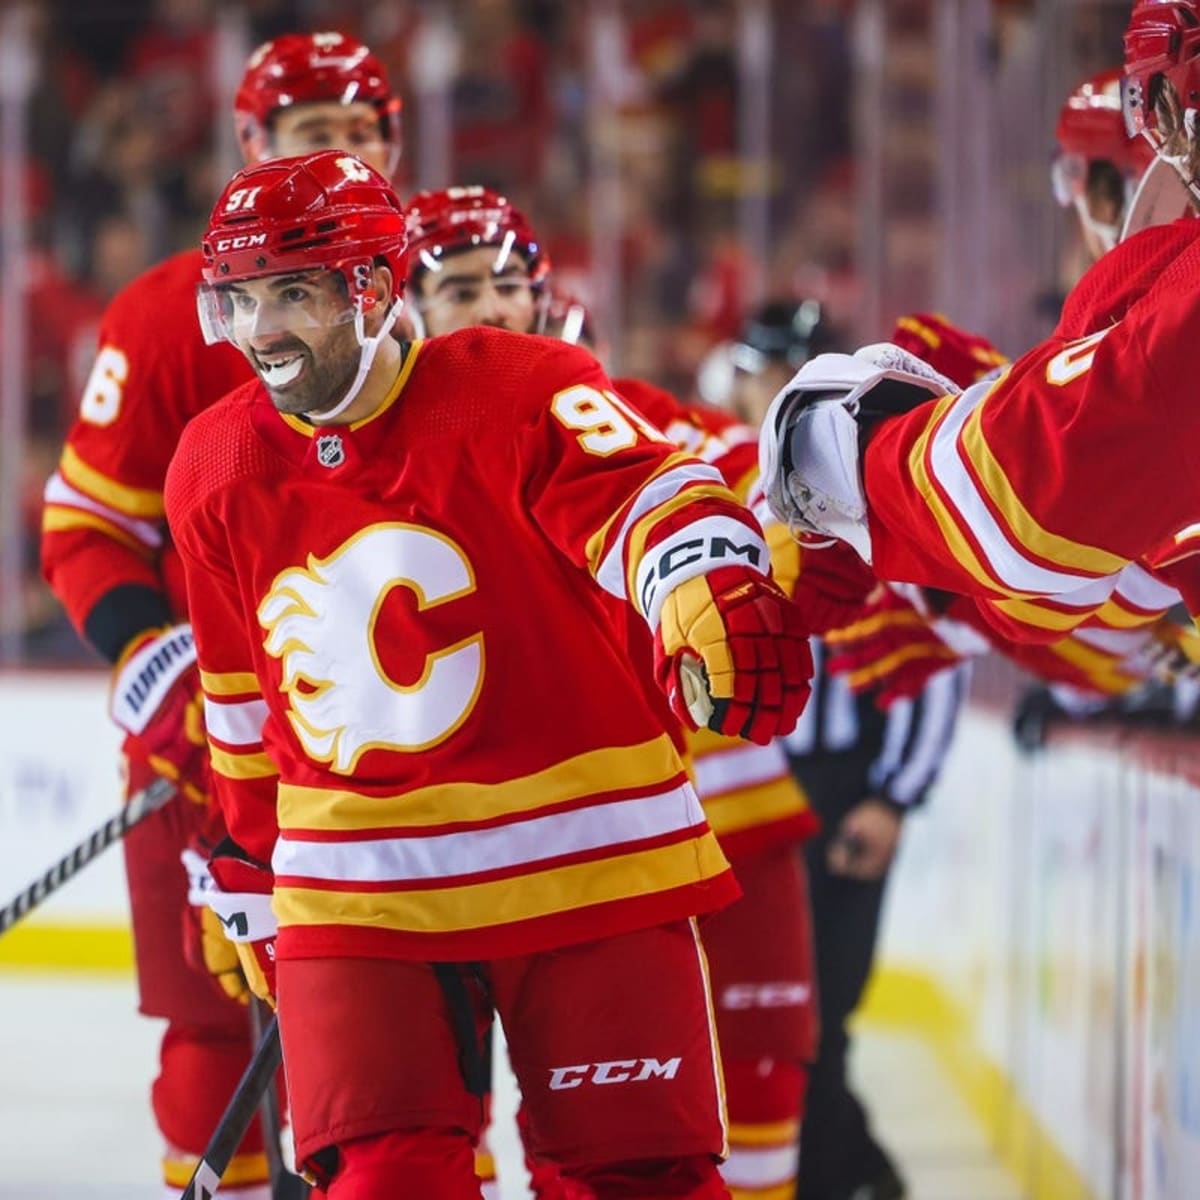 Watch Calgary Flames at Minnesota Wild Stream NHL live, TV - How to Watch and Stream Major League and College Sports